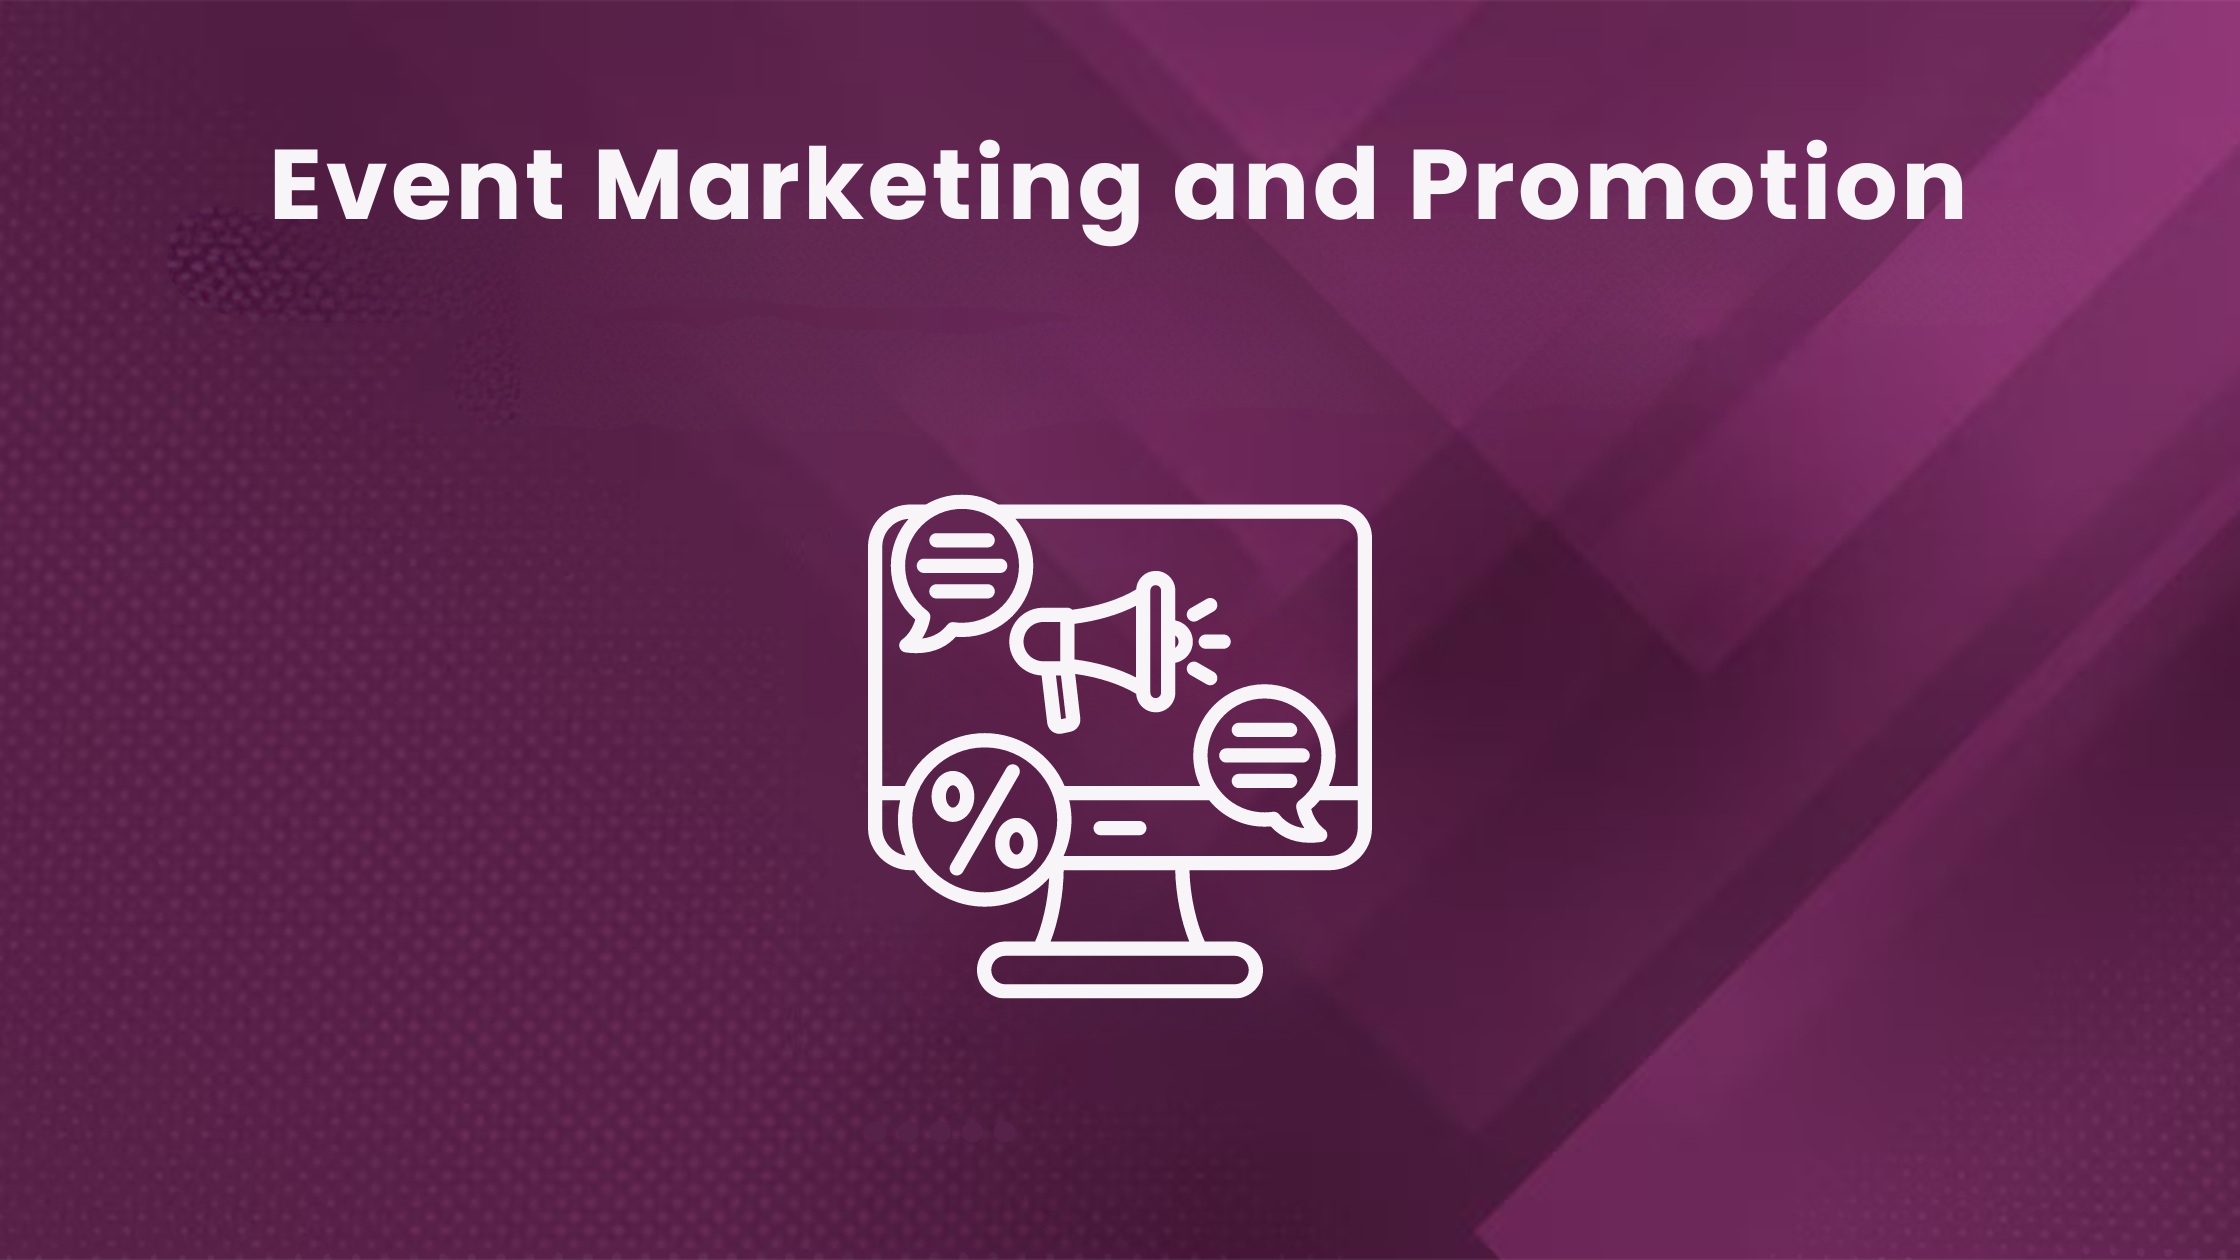 Event marketing and promotion